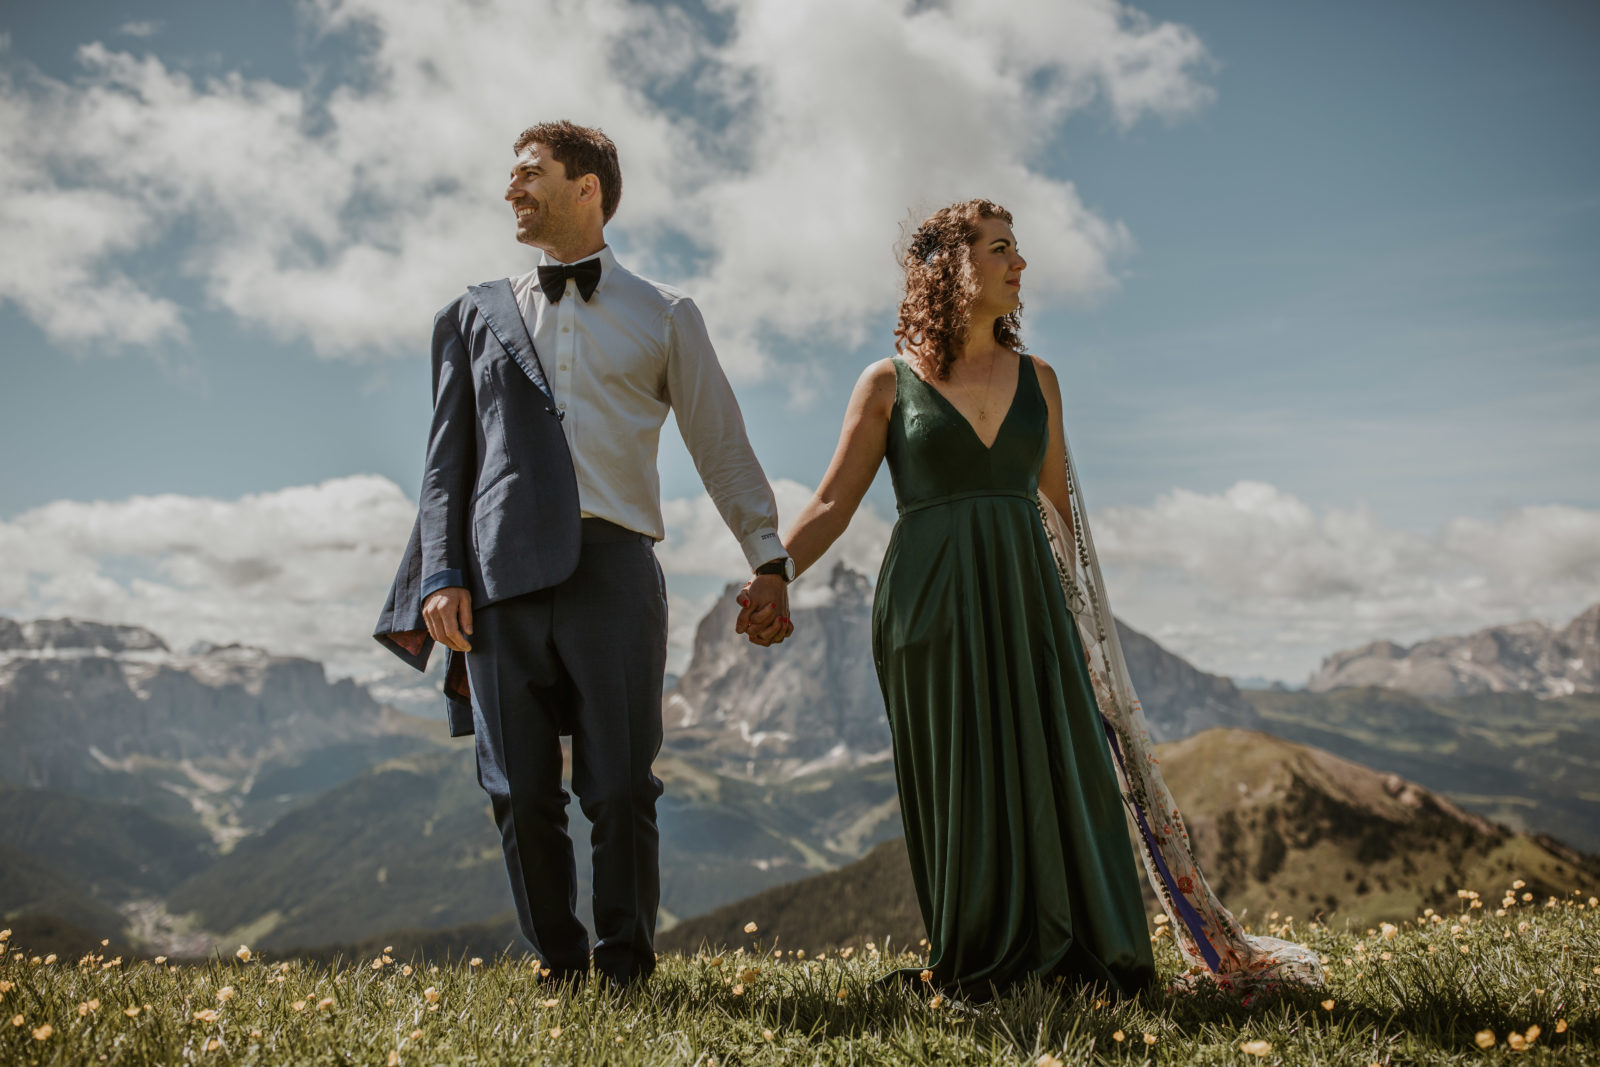 A couple stands holding hands facing separate directions near Seceda in the Italian Dolomites. The mountains stretch in the background. They are wearing their wedding attire. The grass is very green and there are small yellow flowers.